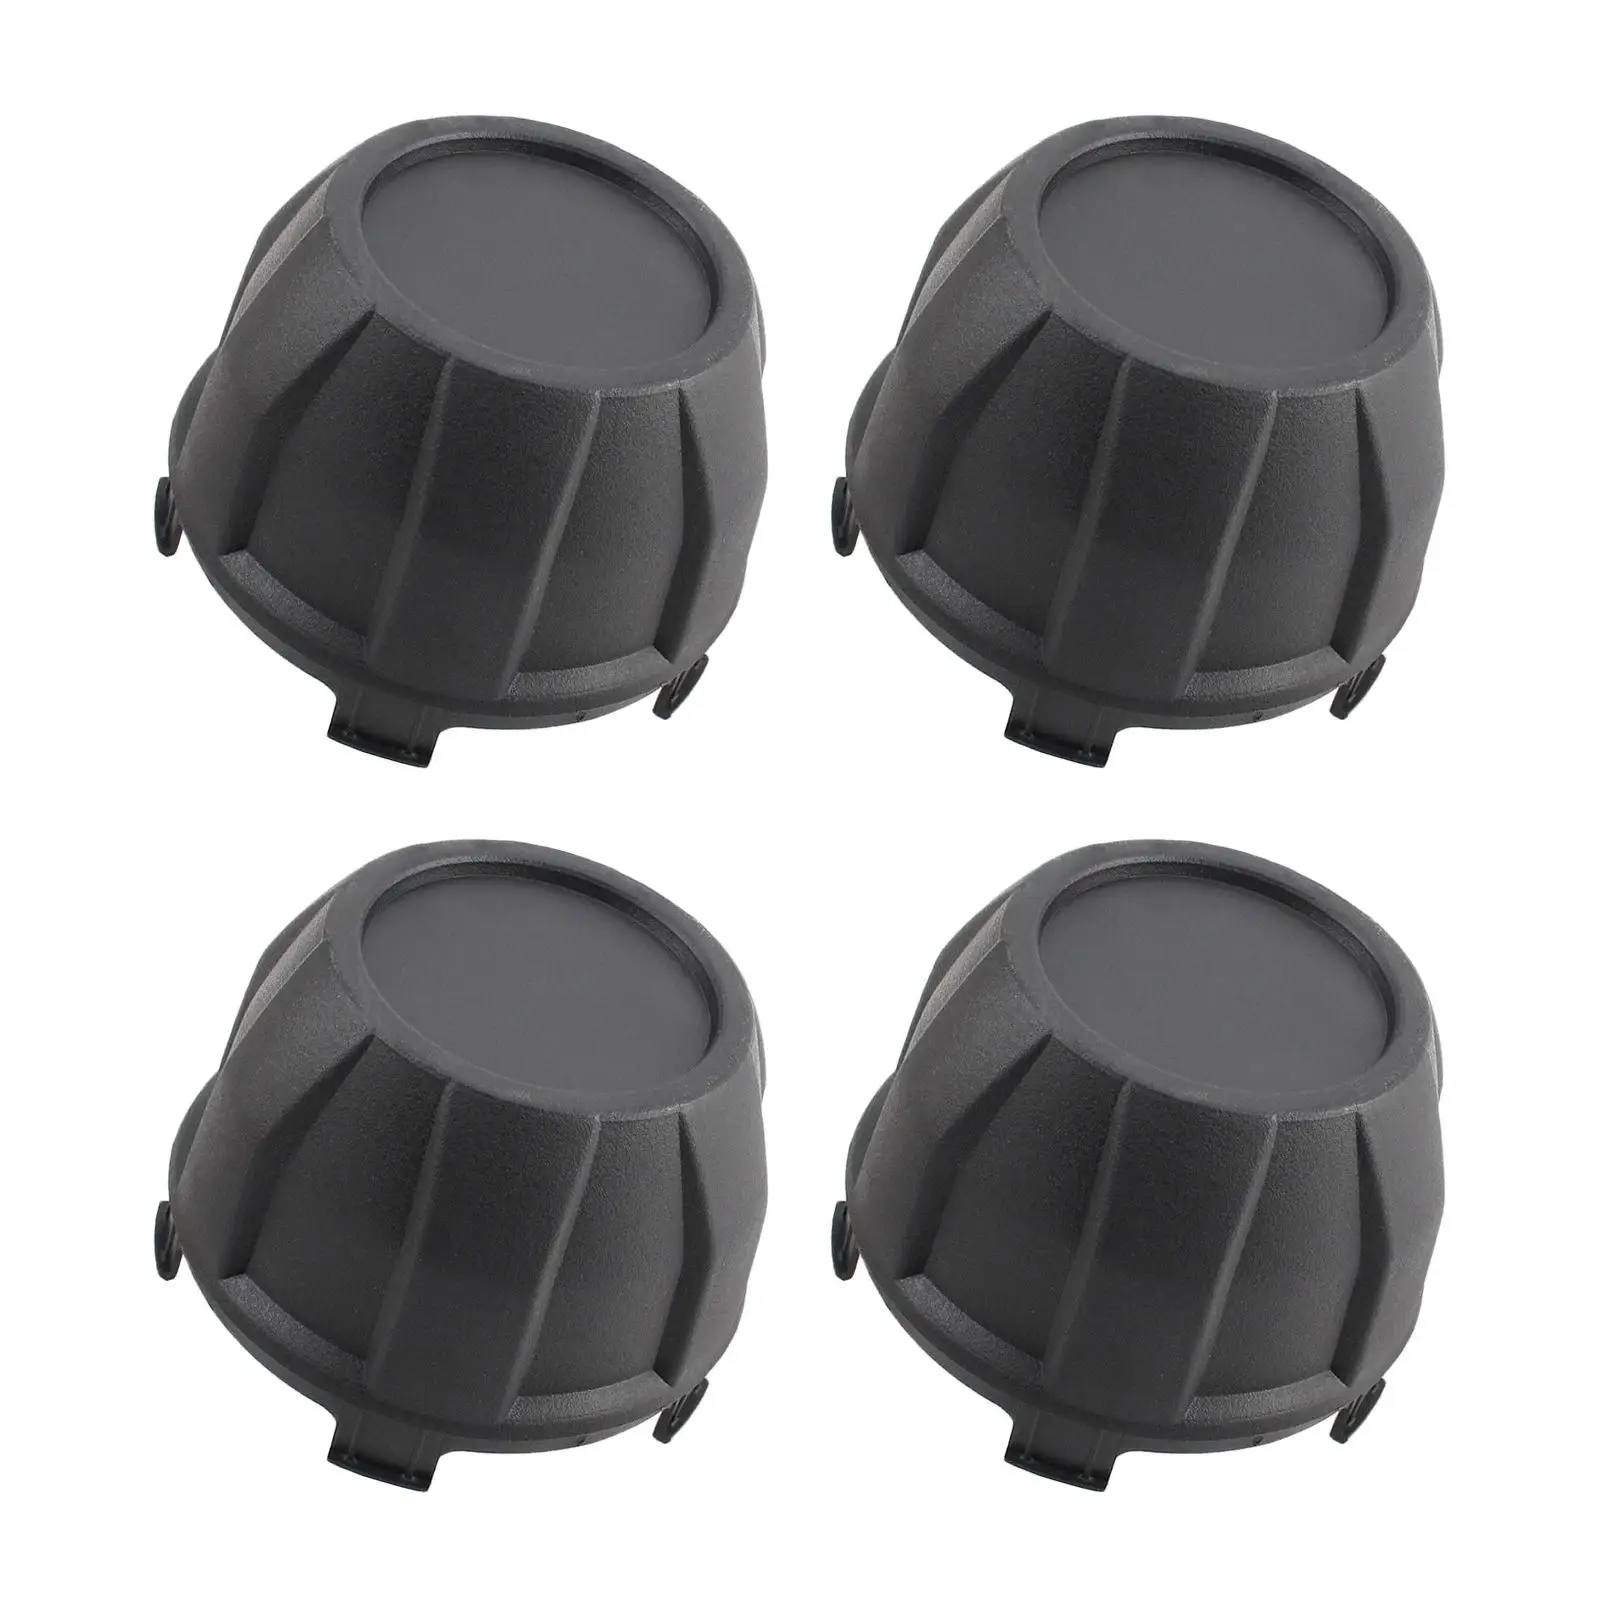 4 Pieces Tire Wheel Hub Caps Motorcycle Easy to Install Wheel Cap Cover Assembly for Kawasaki Repairing Accessory Premium